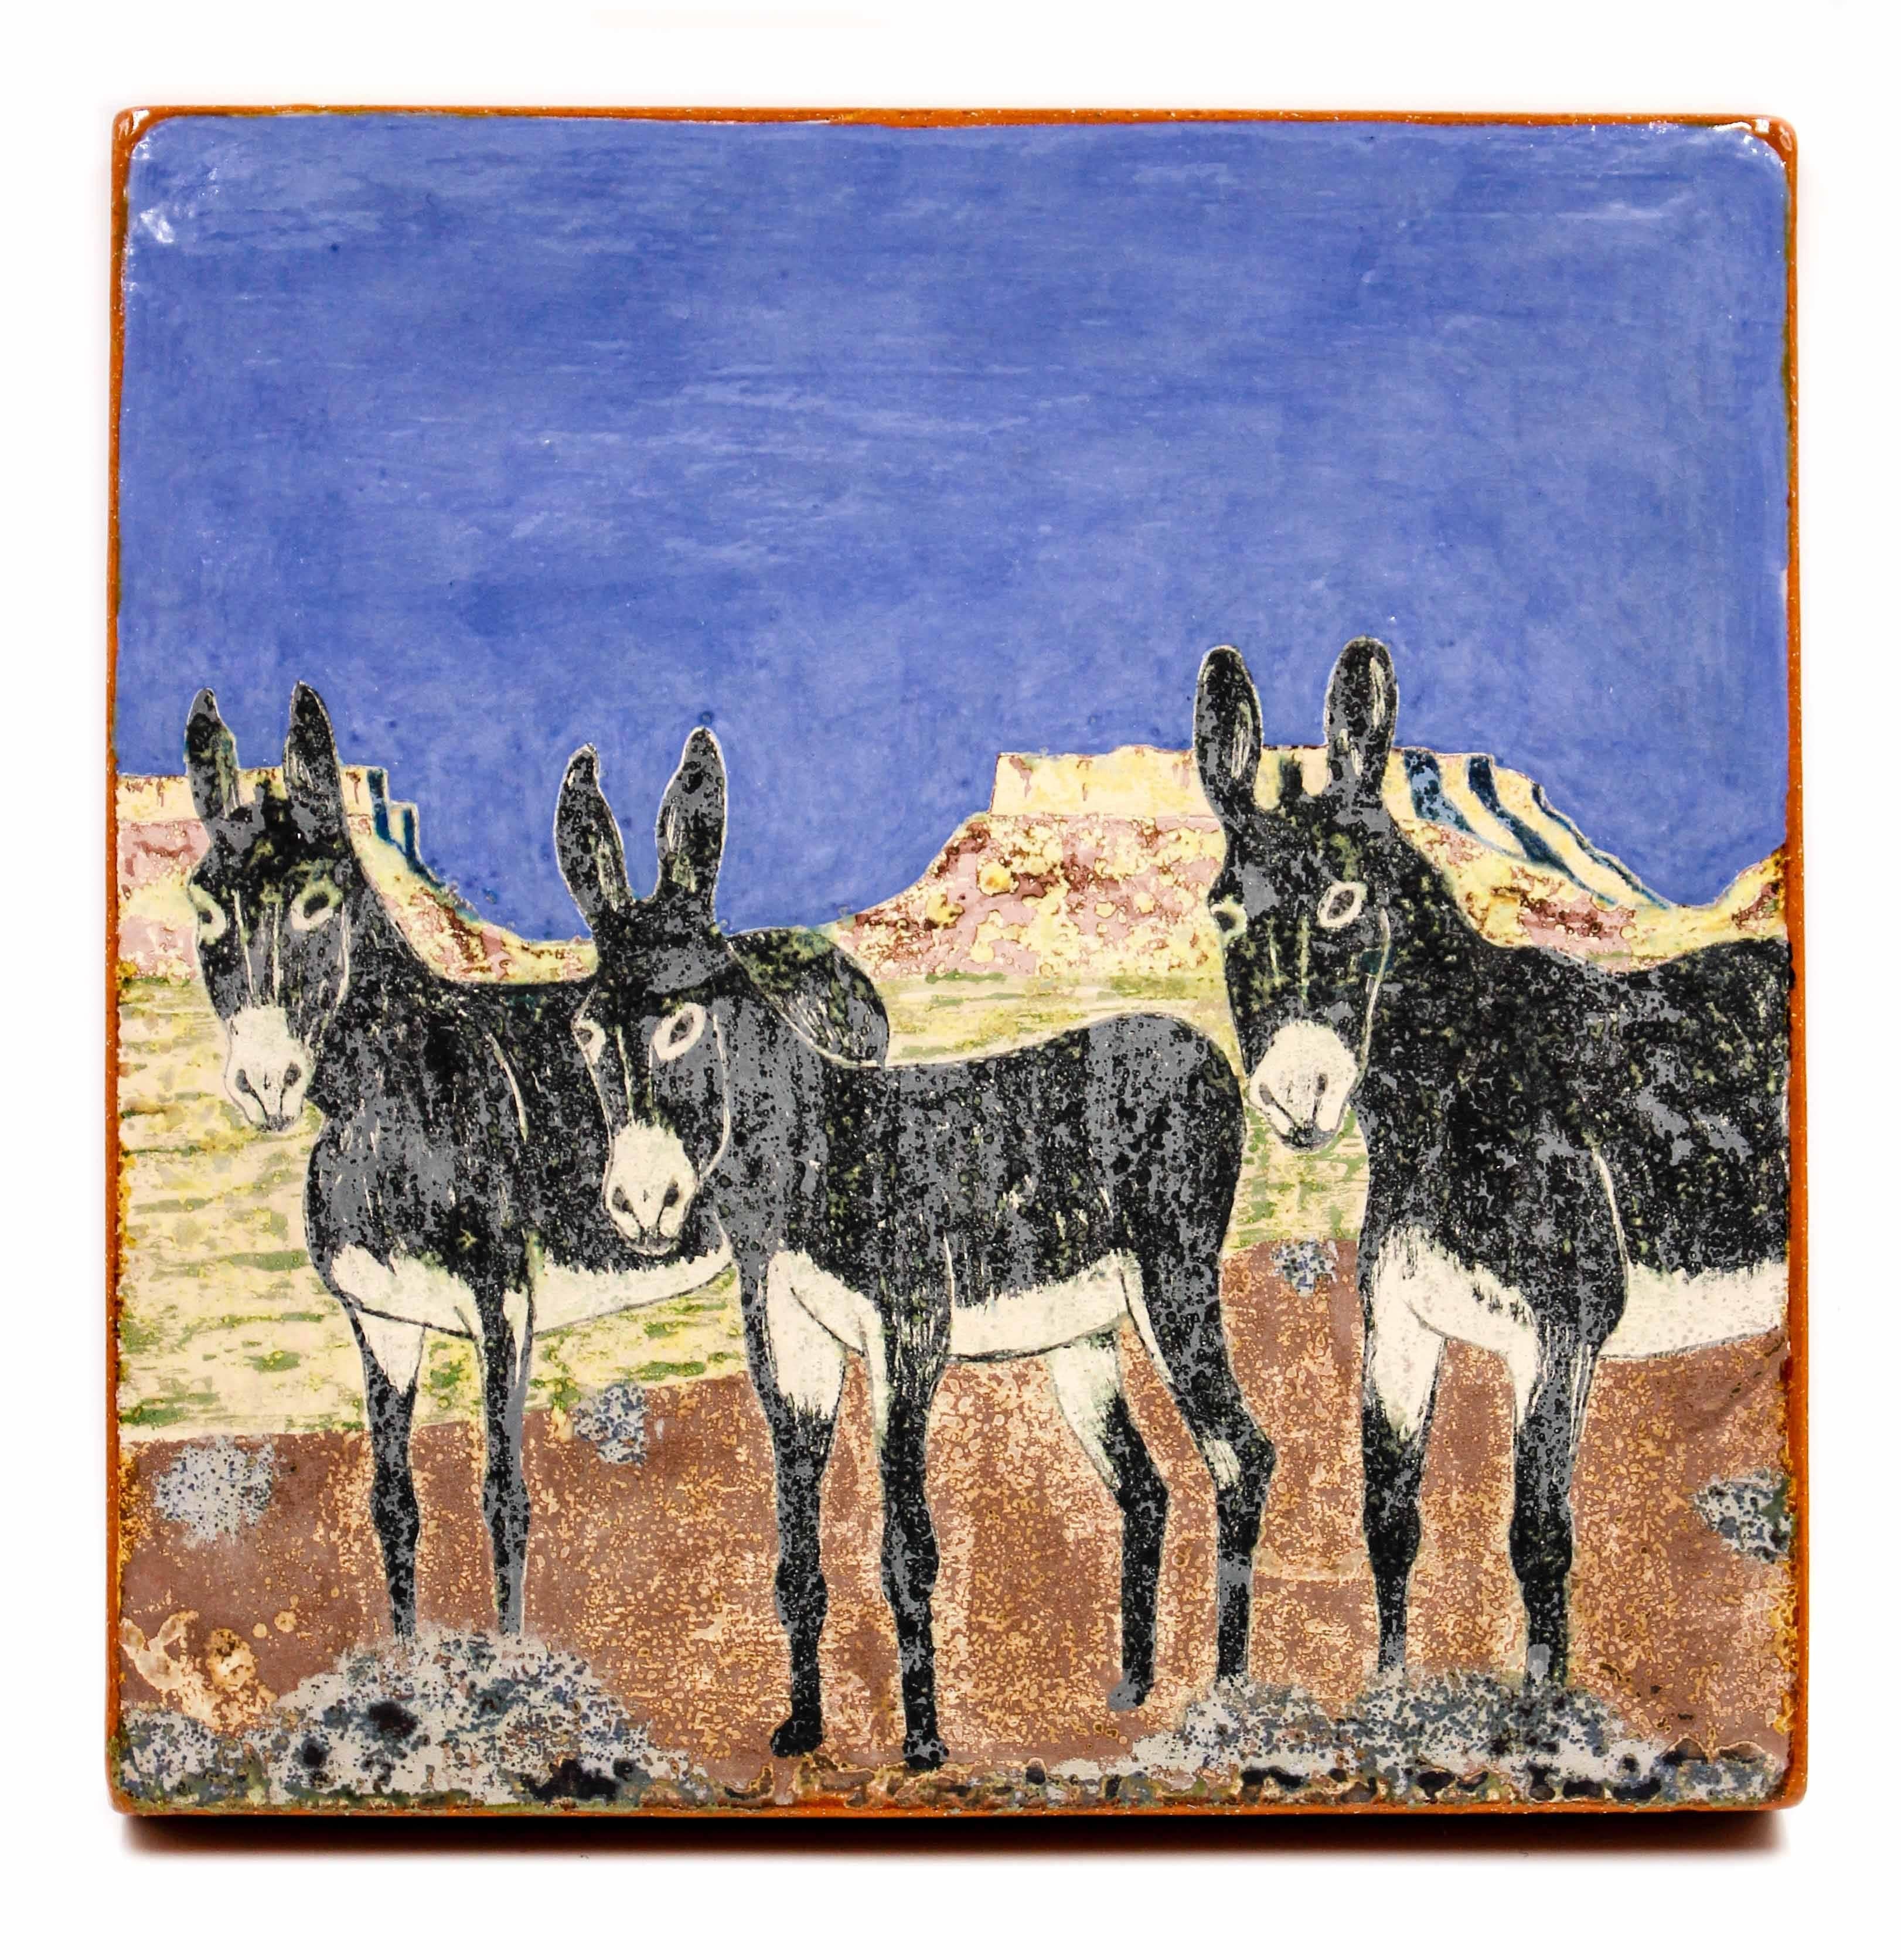 3 Donkeys  - Painting by Wesley Anderegg